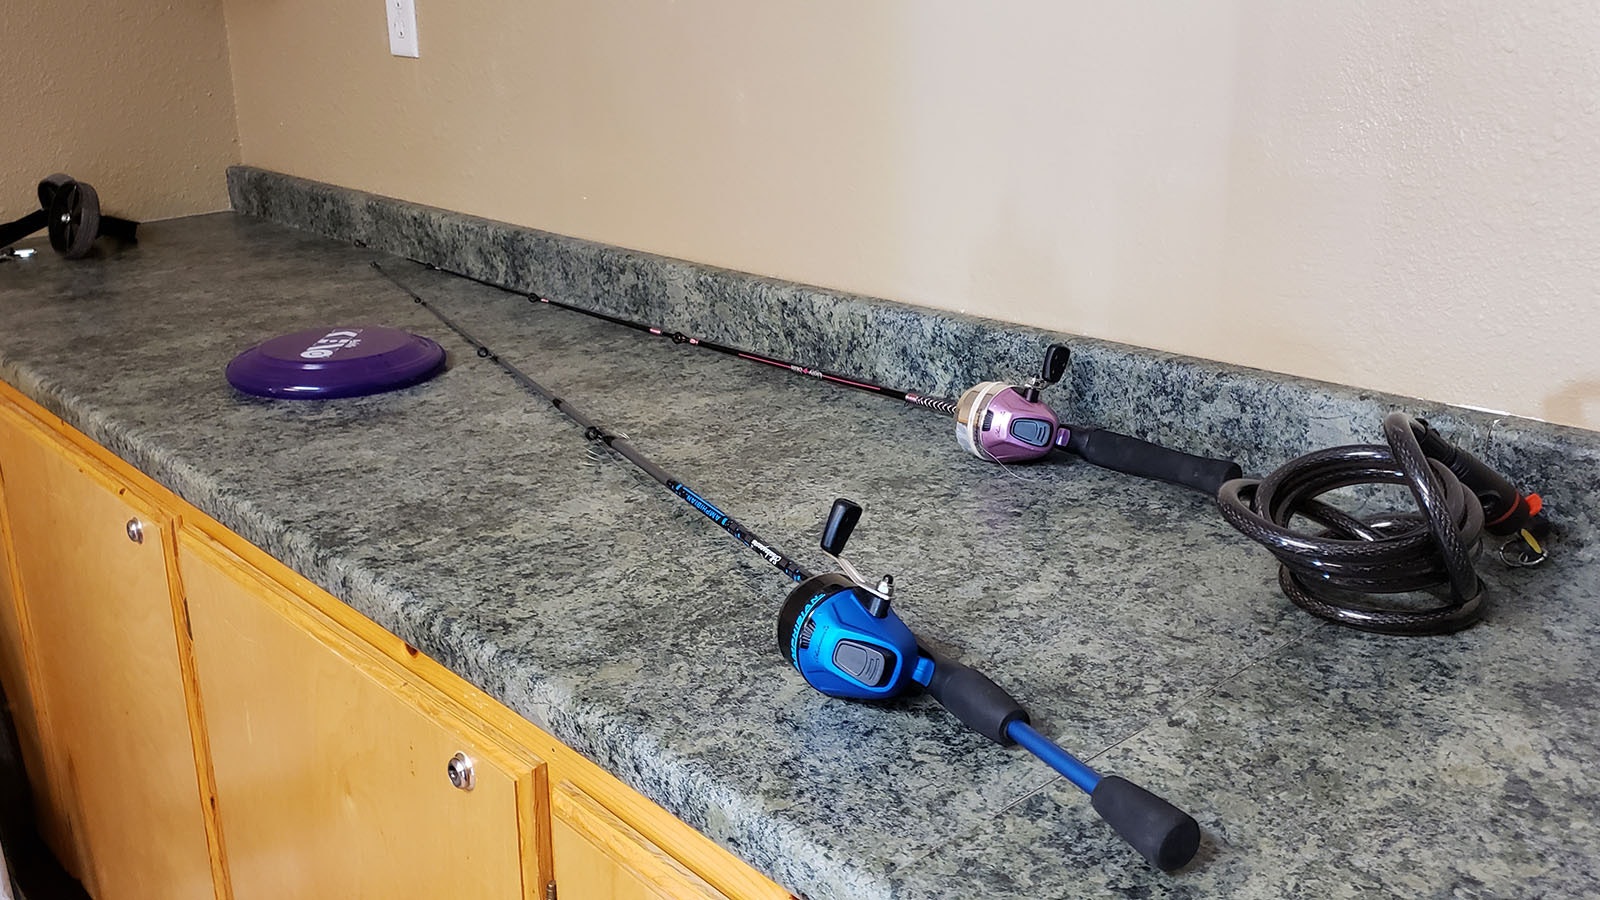 Fishing rods and frisbees available in the gear garage.